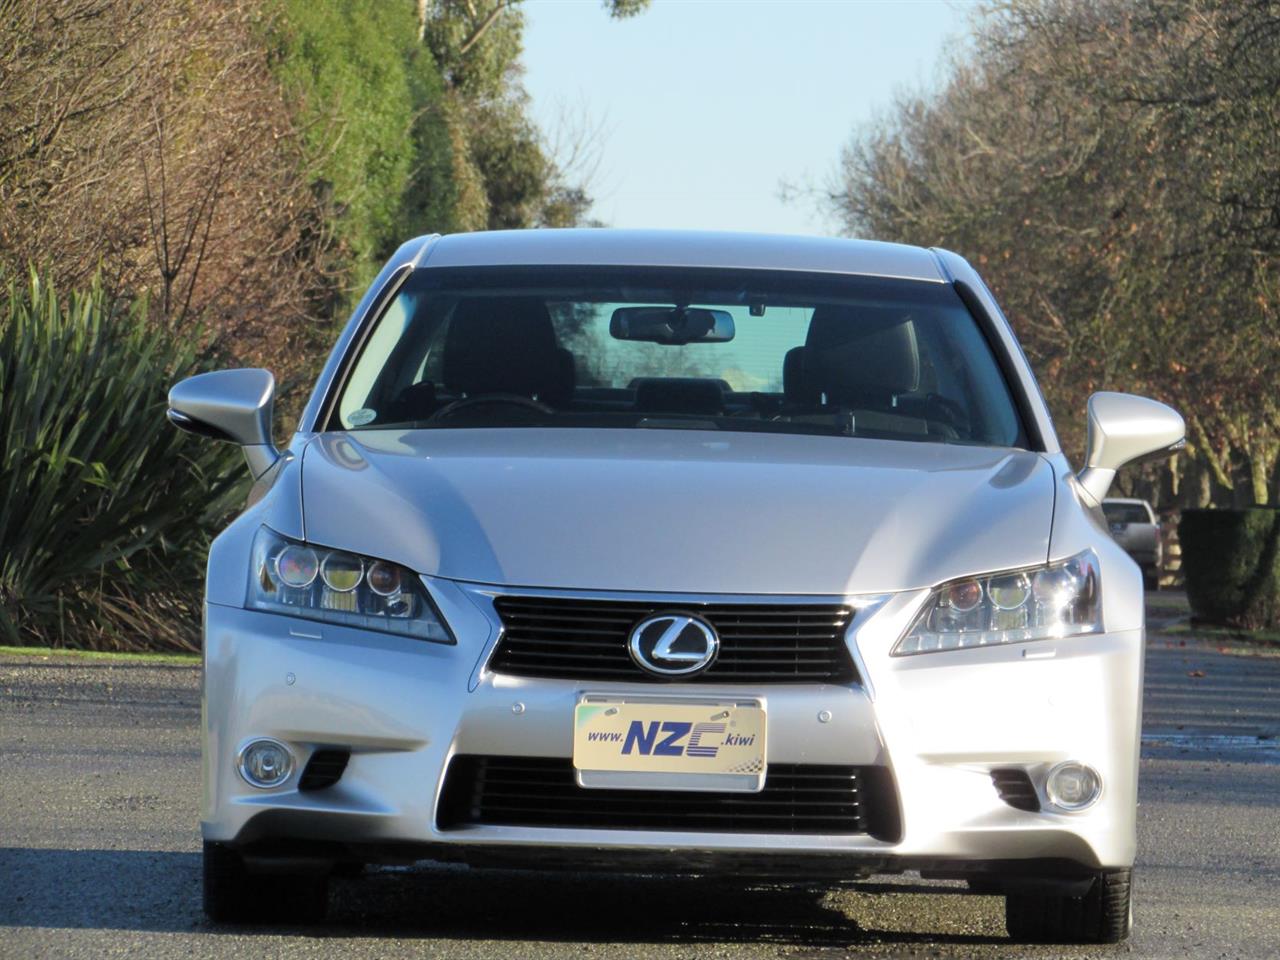 2012 Lexus GS 350 only $97 weekly